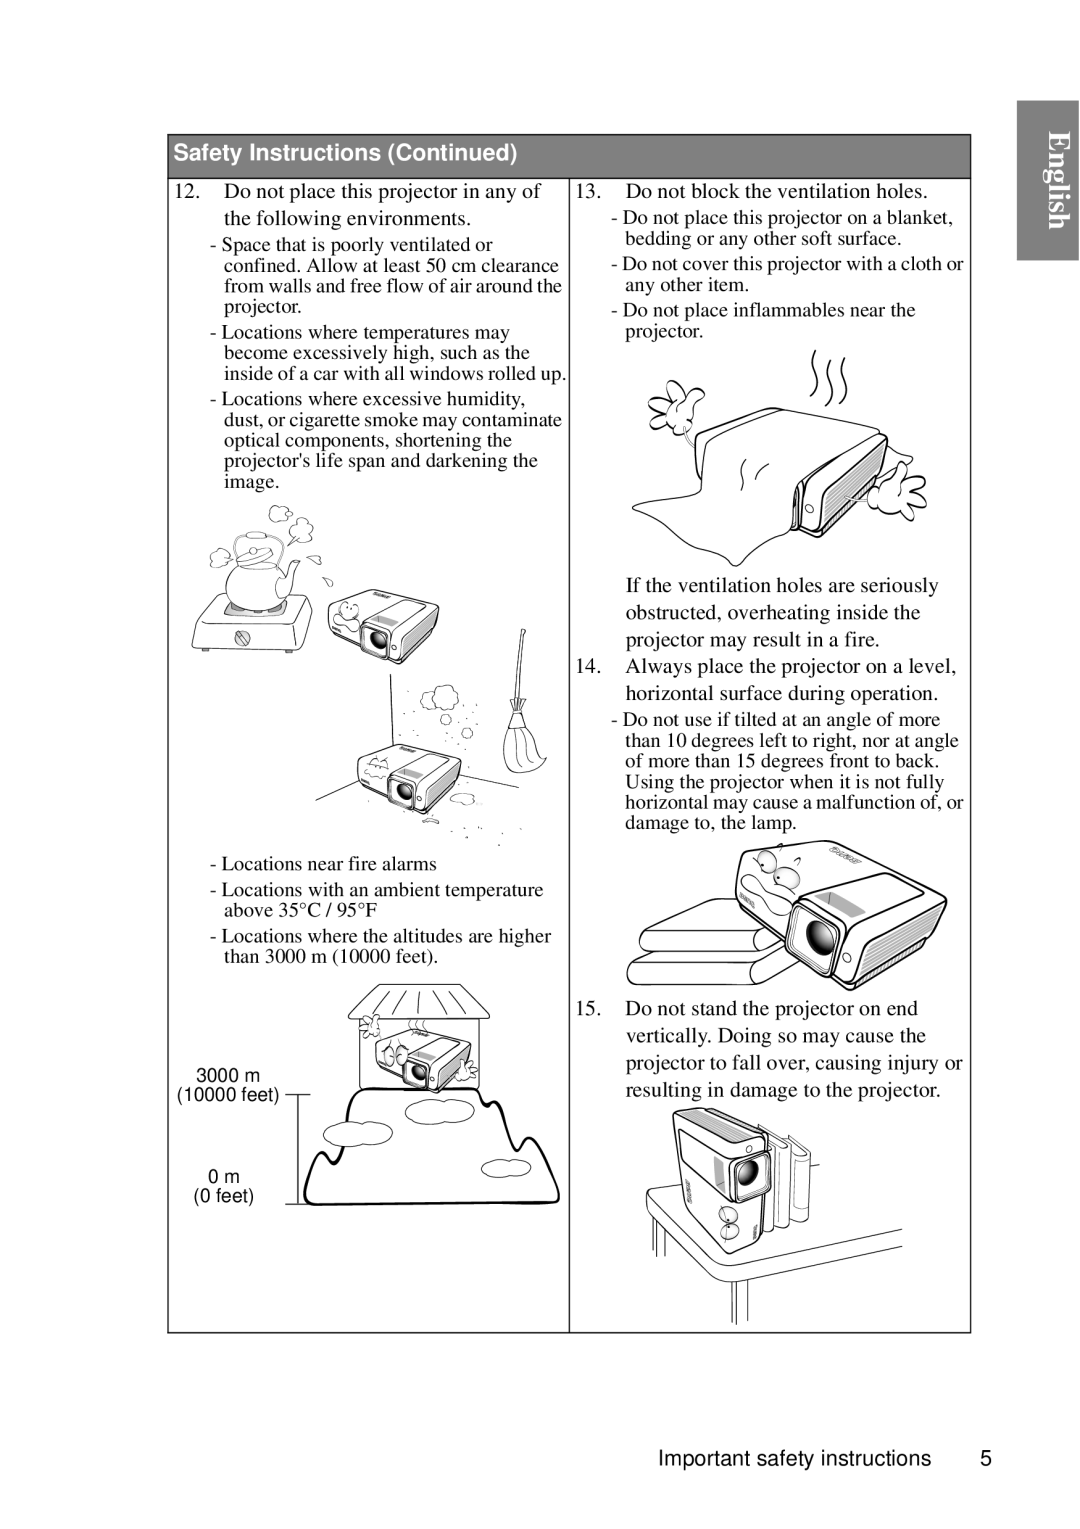 BenQ SP840 English, Safety Instructions Continued, Do not place this projector in any of the following environments 